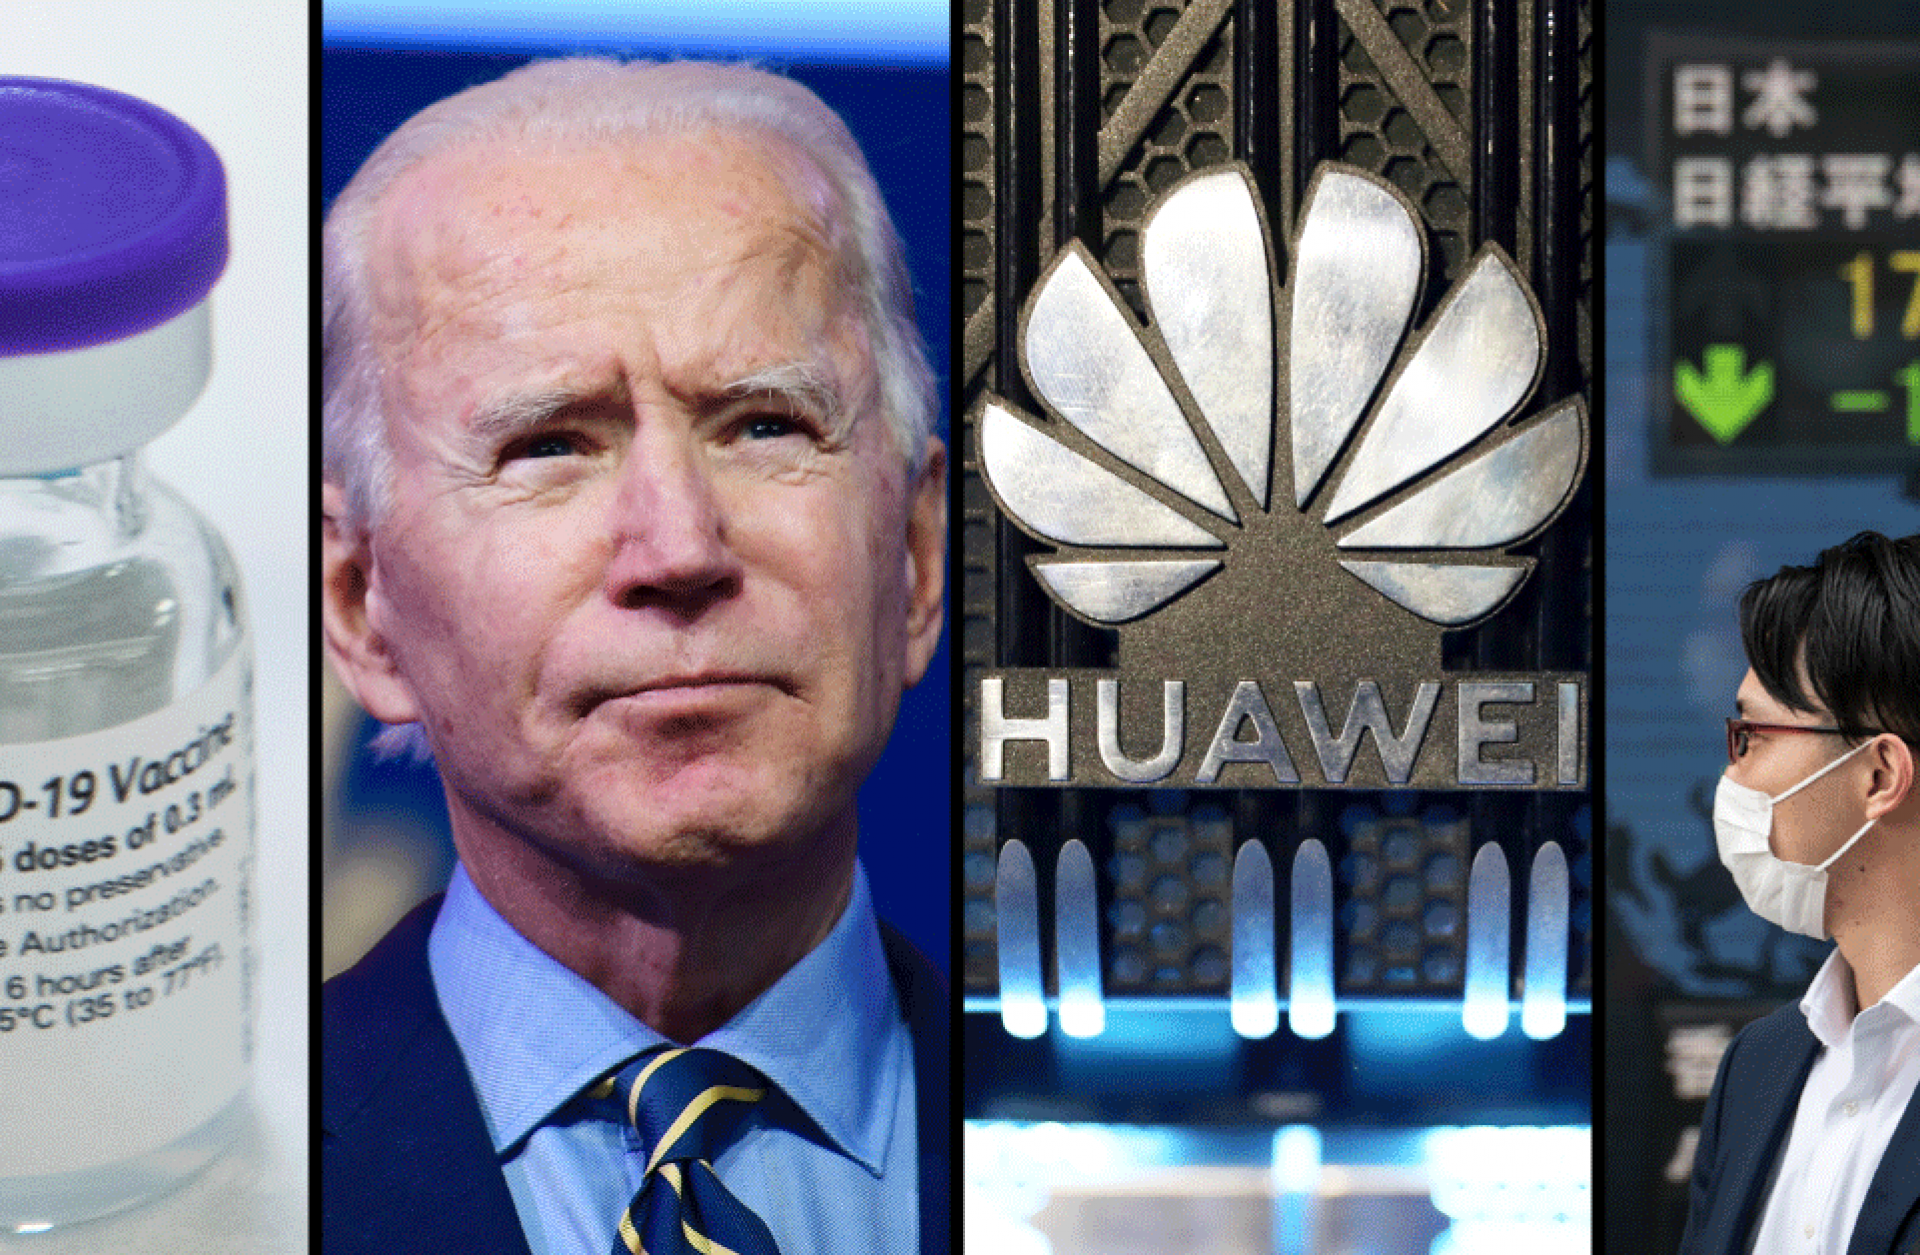 An image of the COVID-19 vaccine, President-elect Joe Biden, the Huawei logo, and a stock market sign